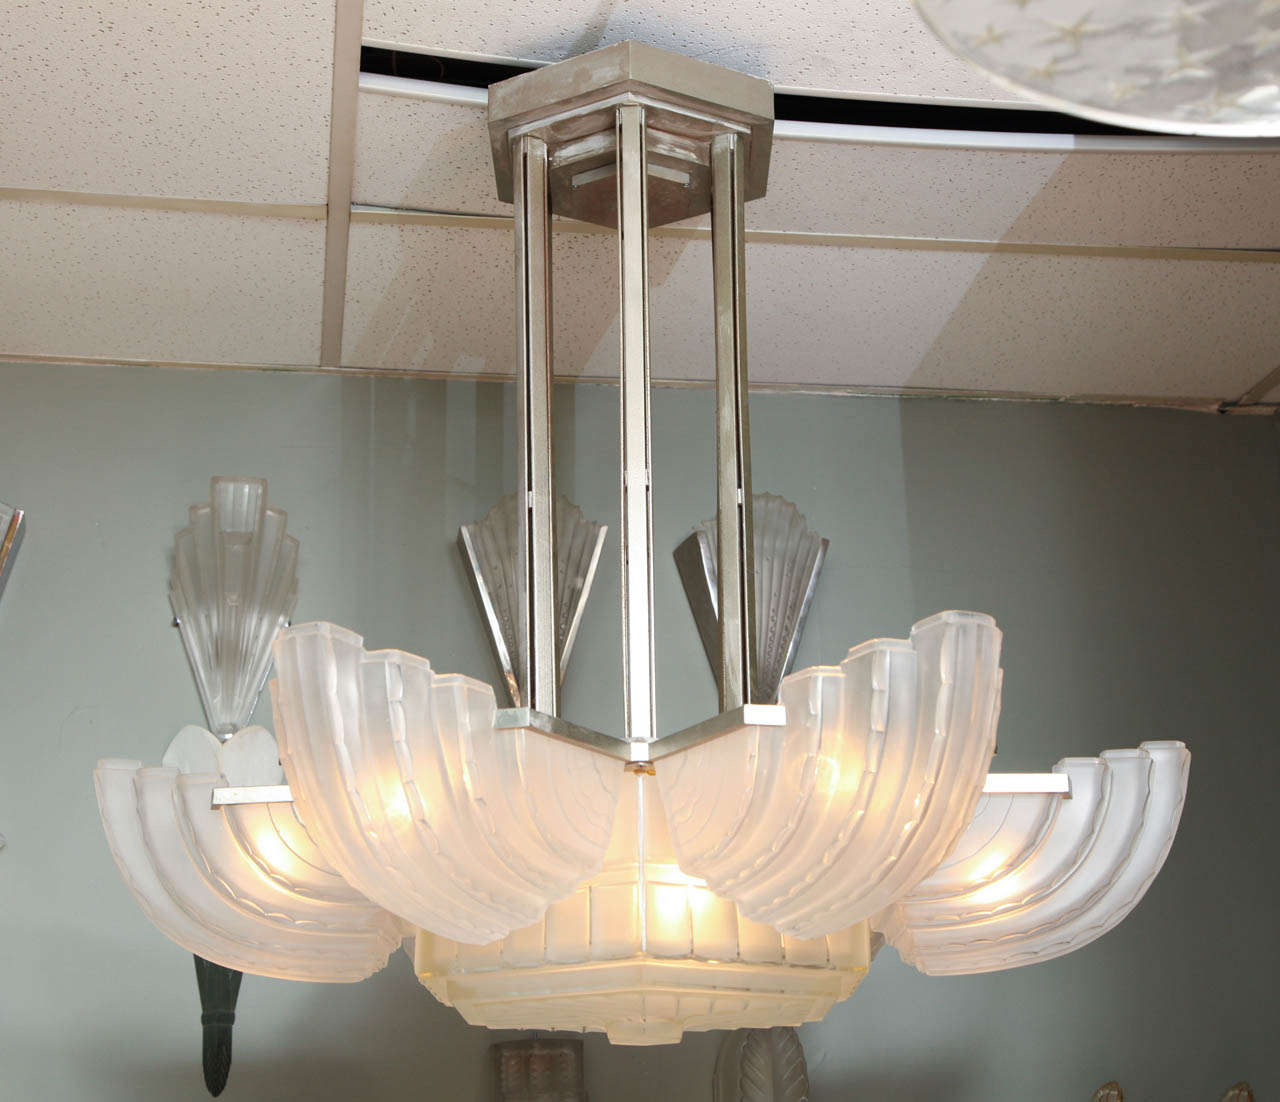 Marius Ernest Sabino. Art Deco chandelier, circa 1930, comprised of six clear and frosted glass shades radiating from a central hexag, mounted in a polished nickel brass frame. 

Measures: Diameter: 36", height: 35”.